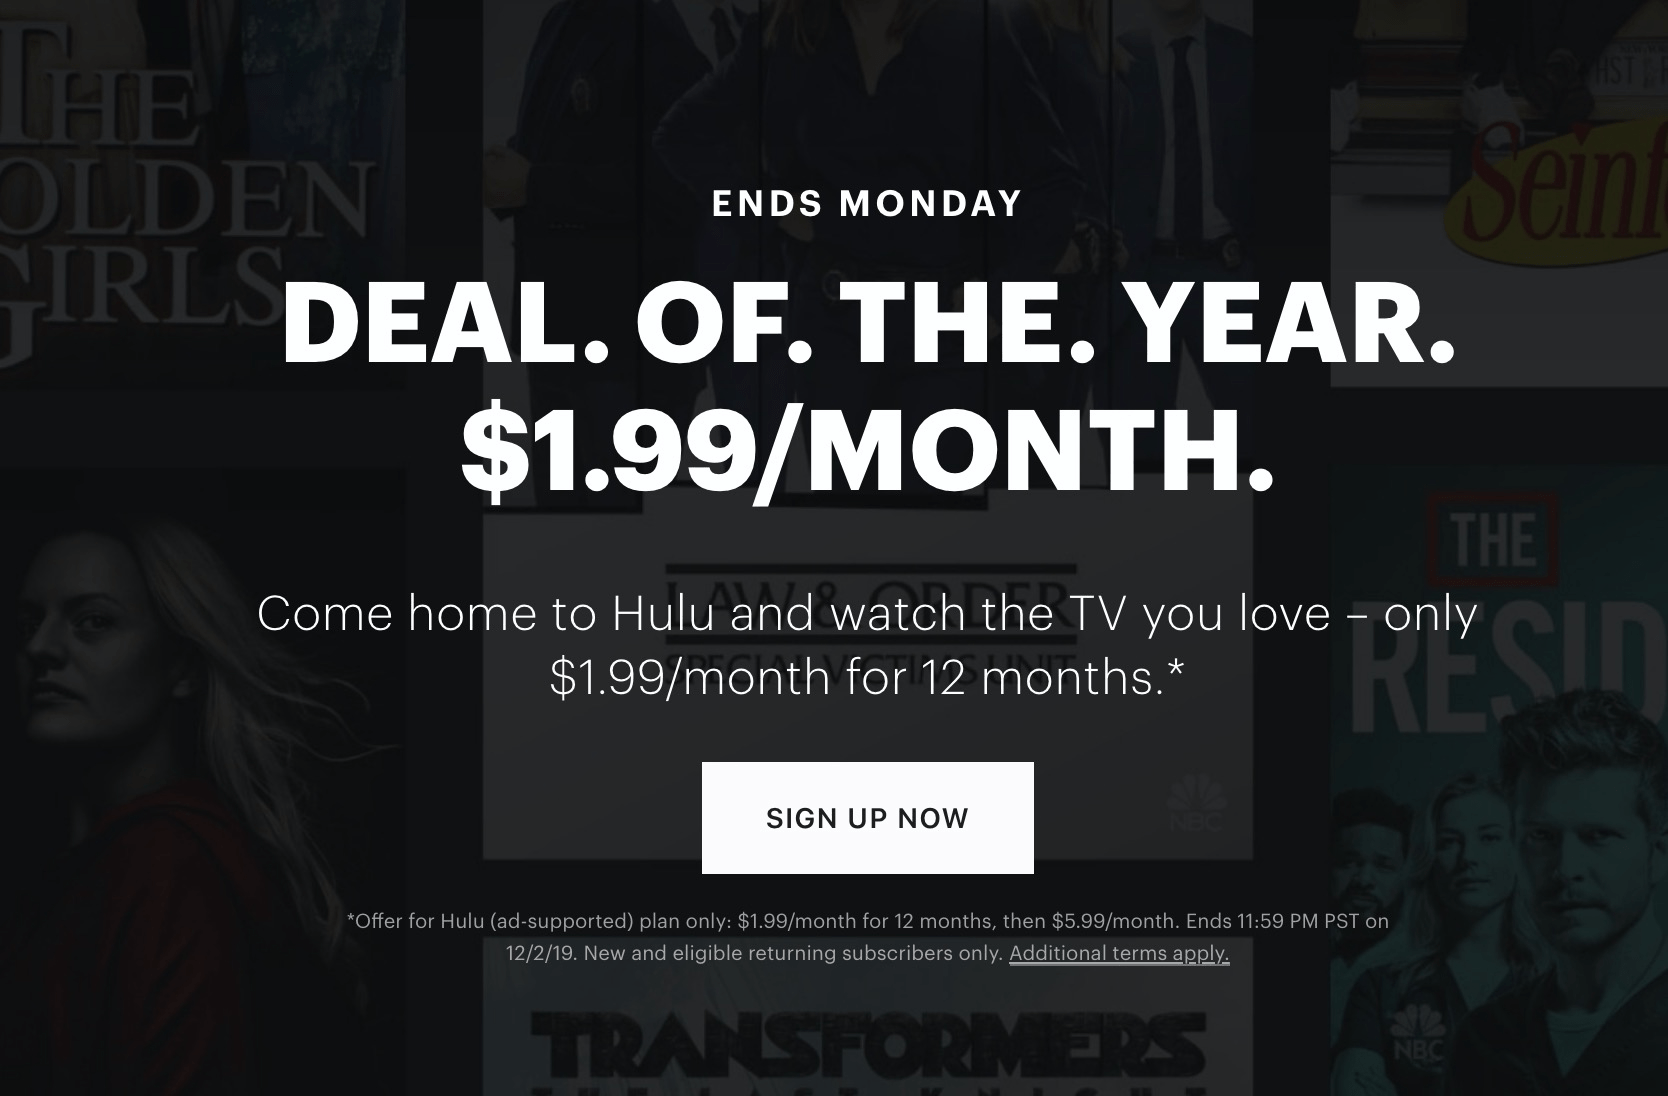 Hulu Cyber Monday Deal Get an entire YEAR of Hulu for just 1.99 per